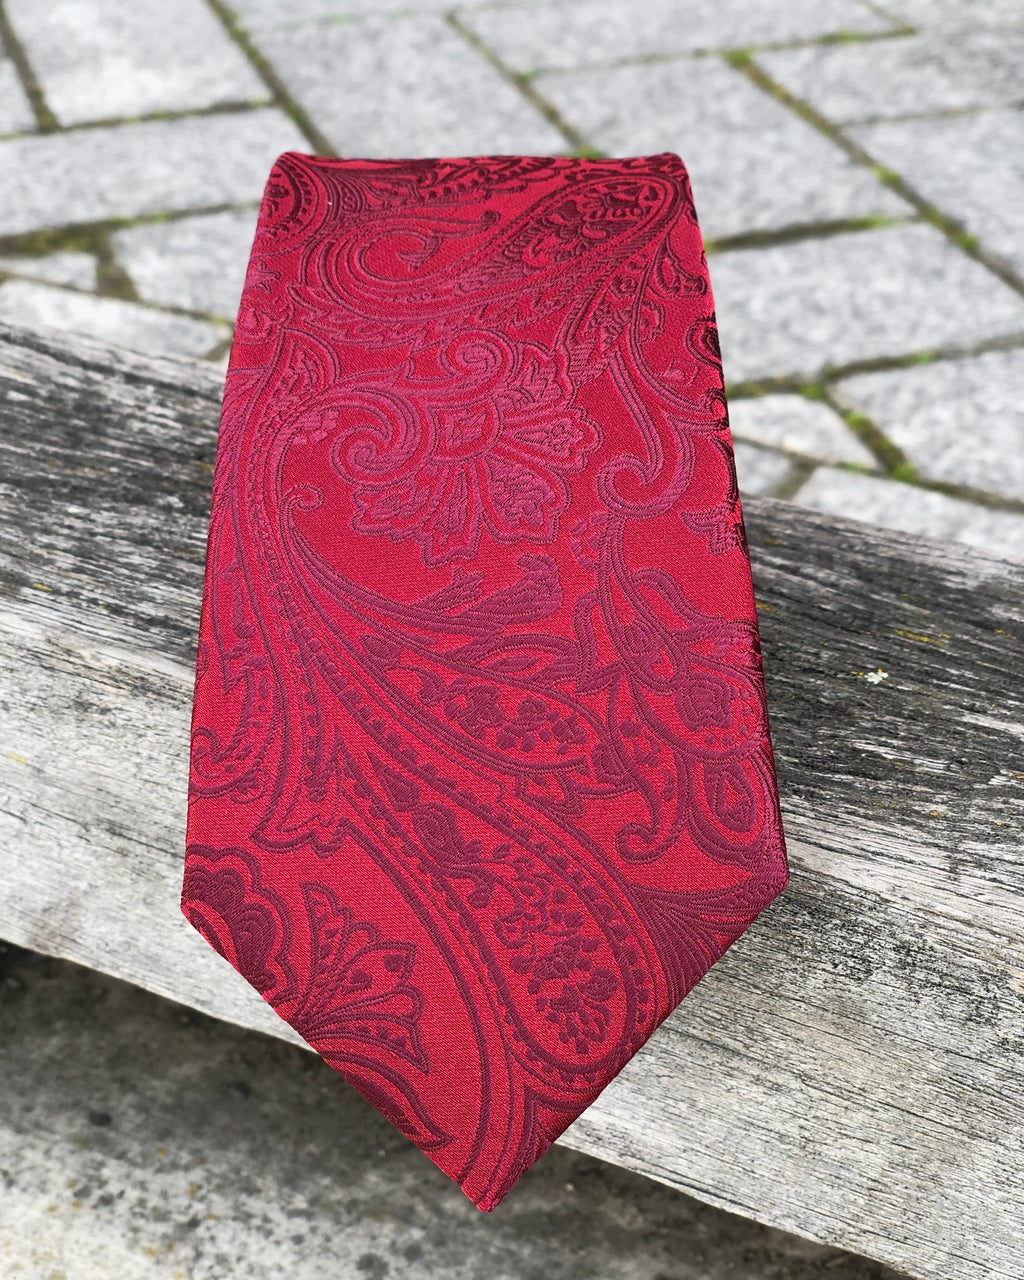 Red satin paisley tie for hire